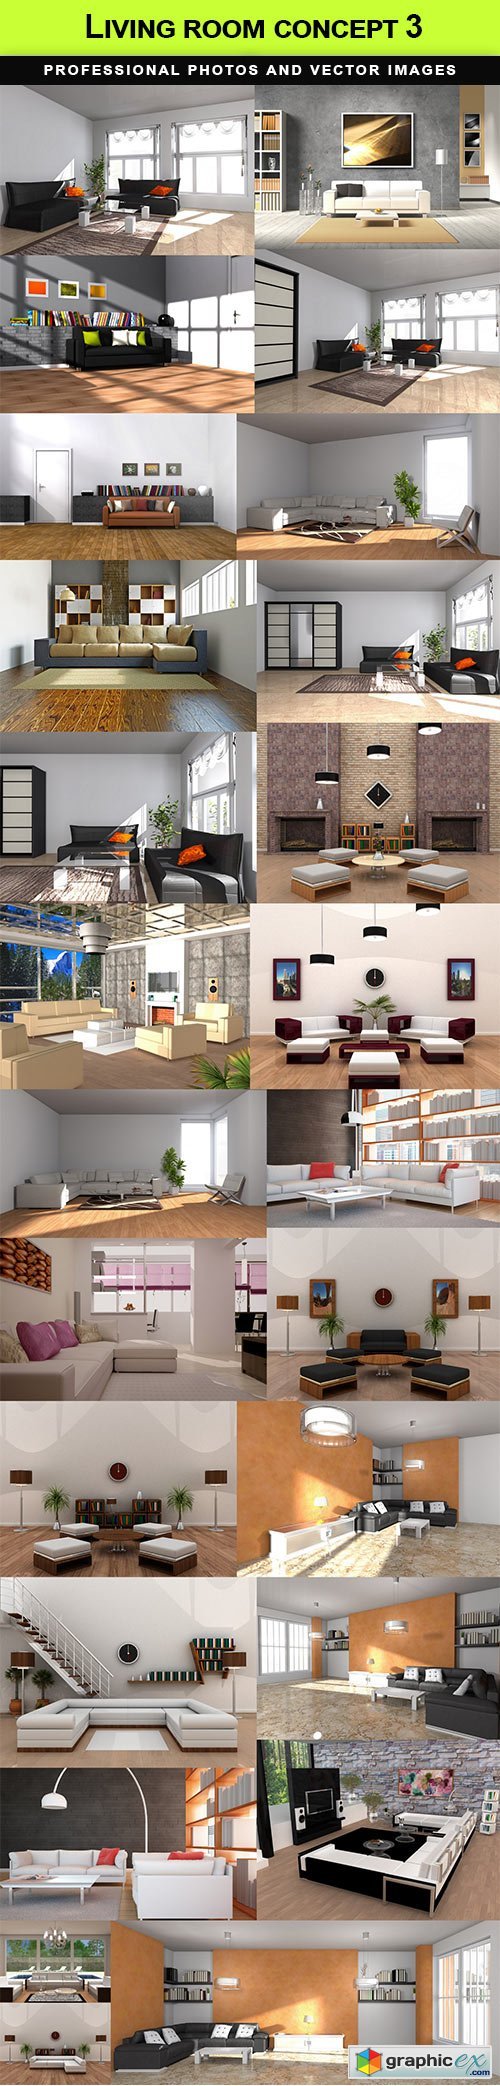 Living room concept 3